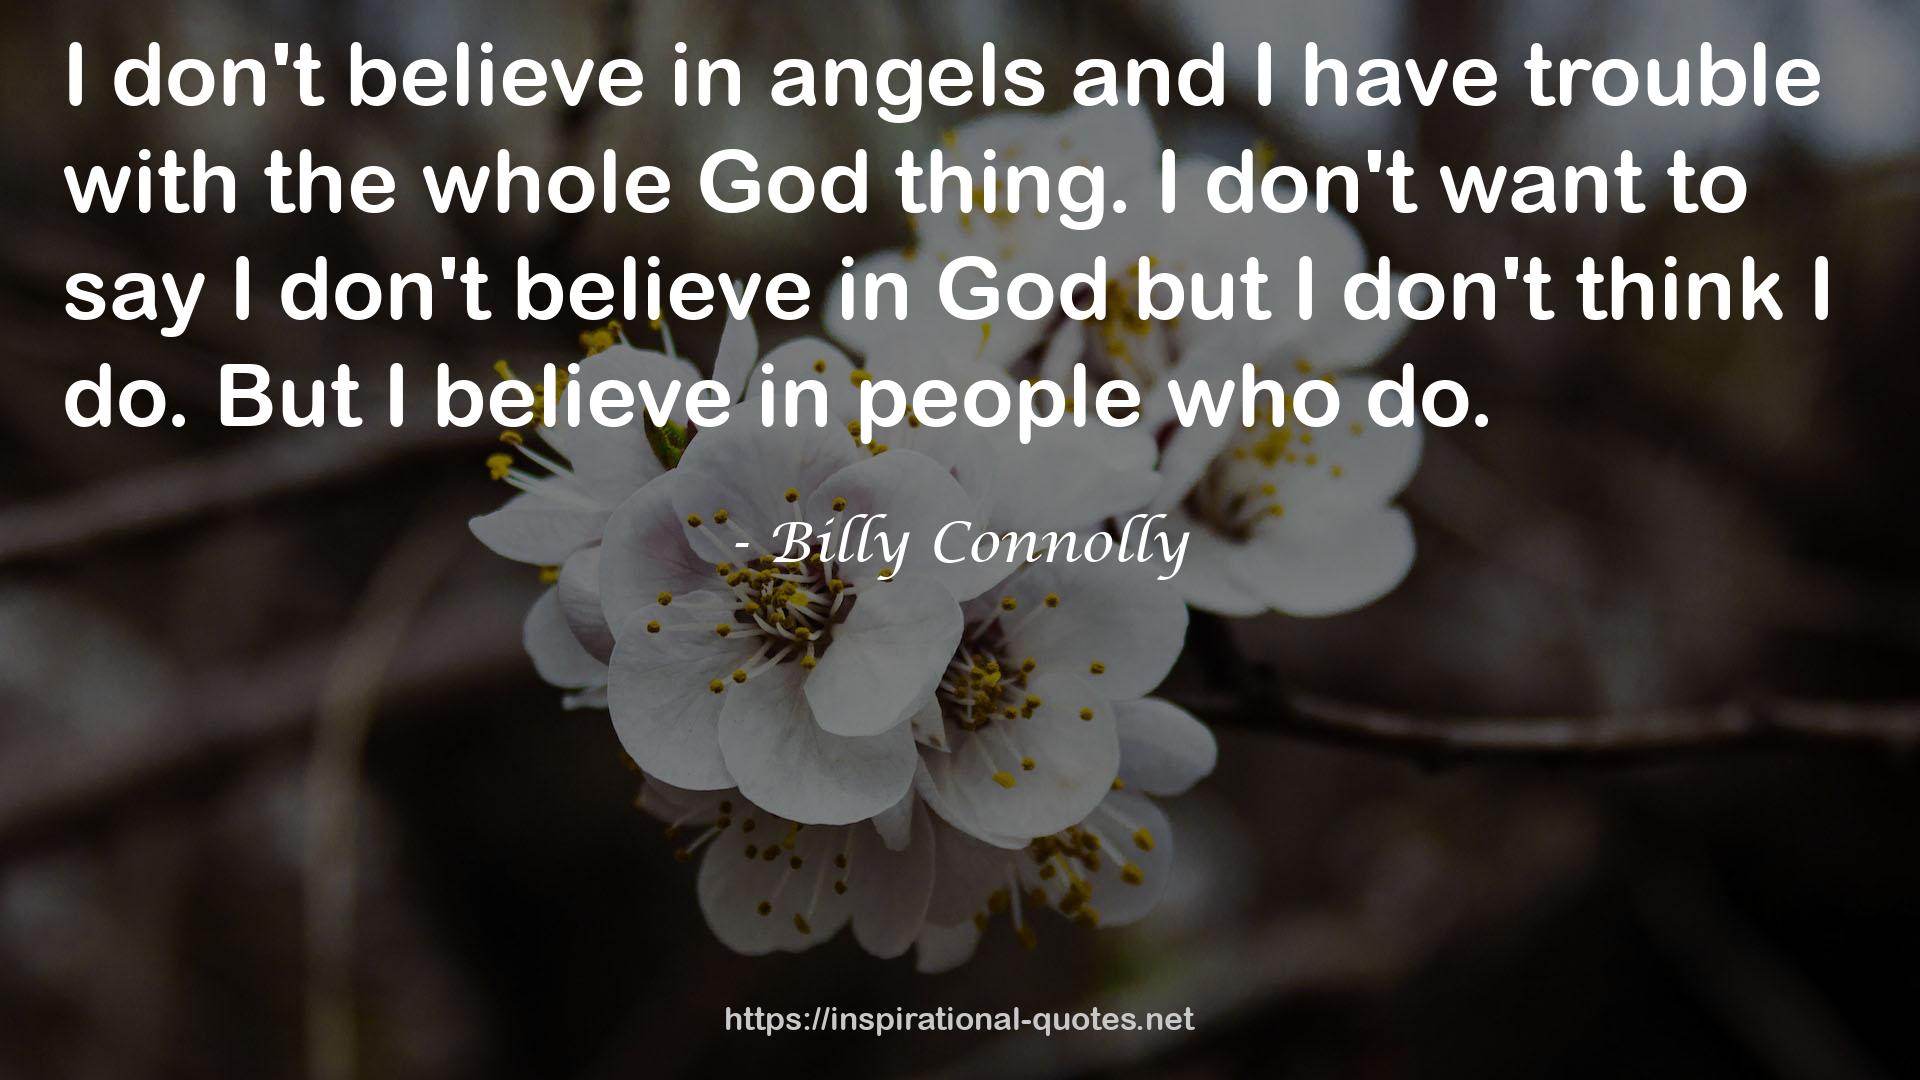 Billy Connolly QUOTES